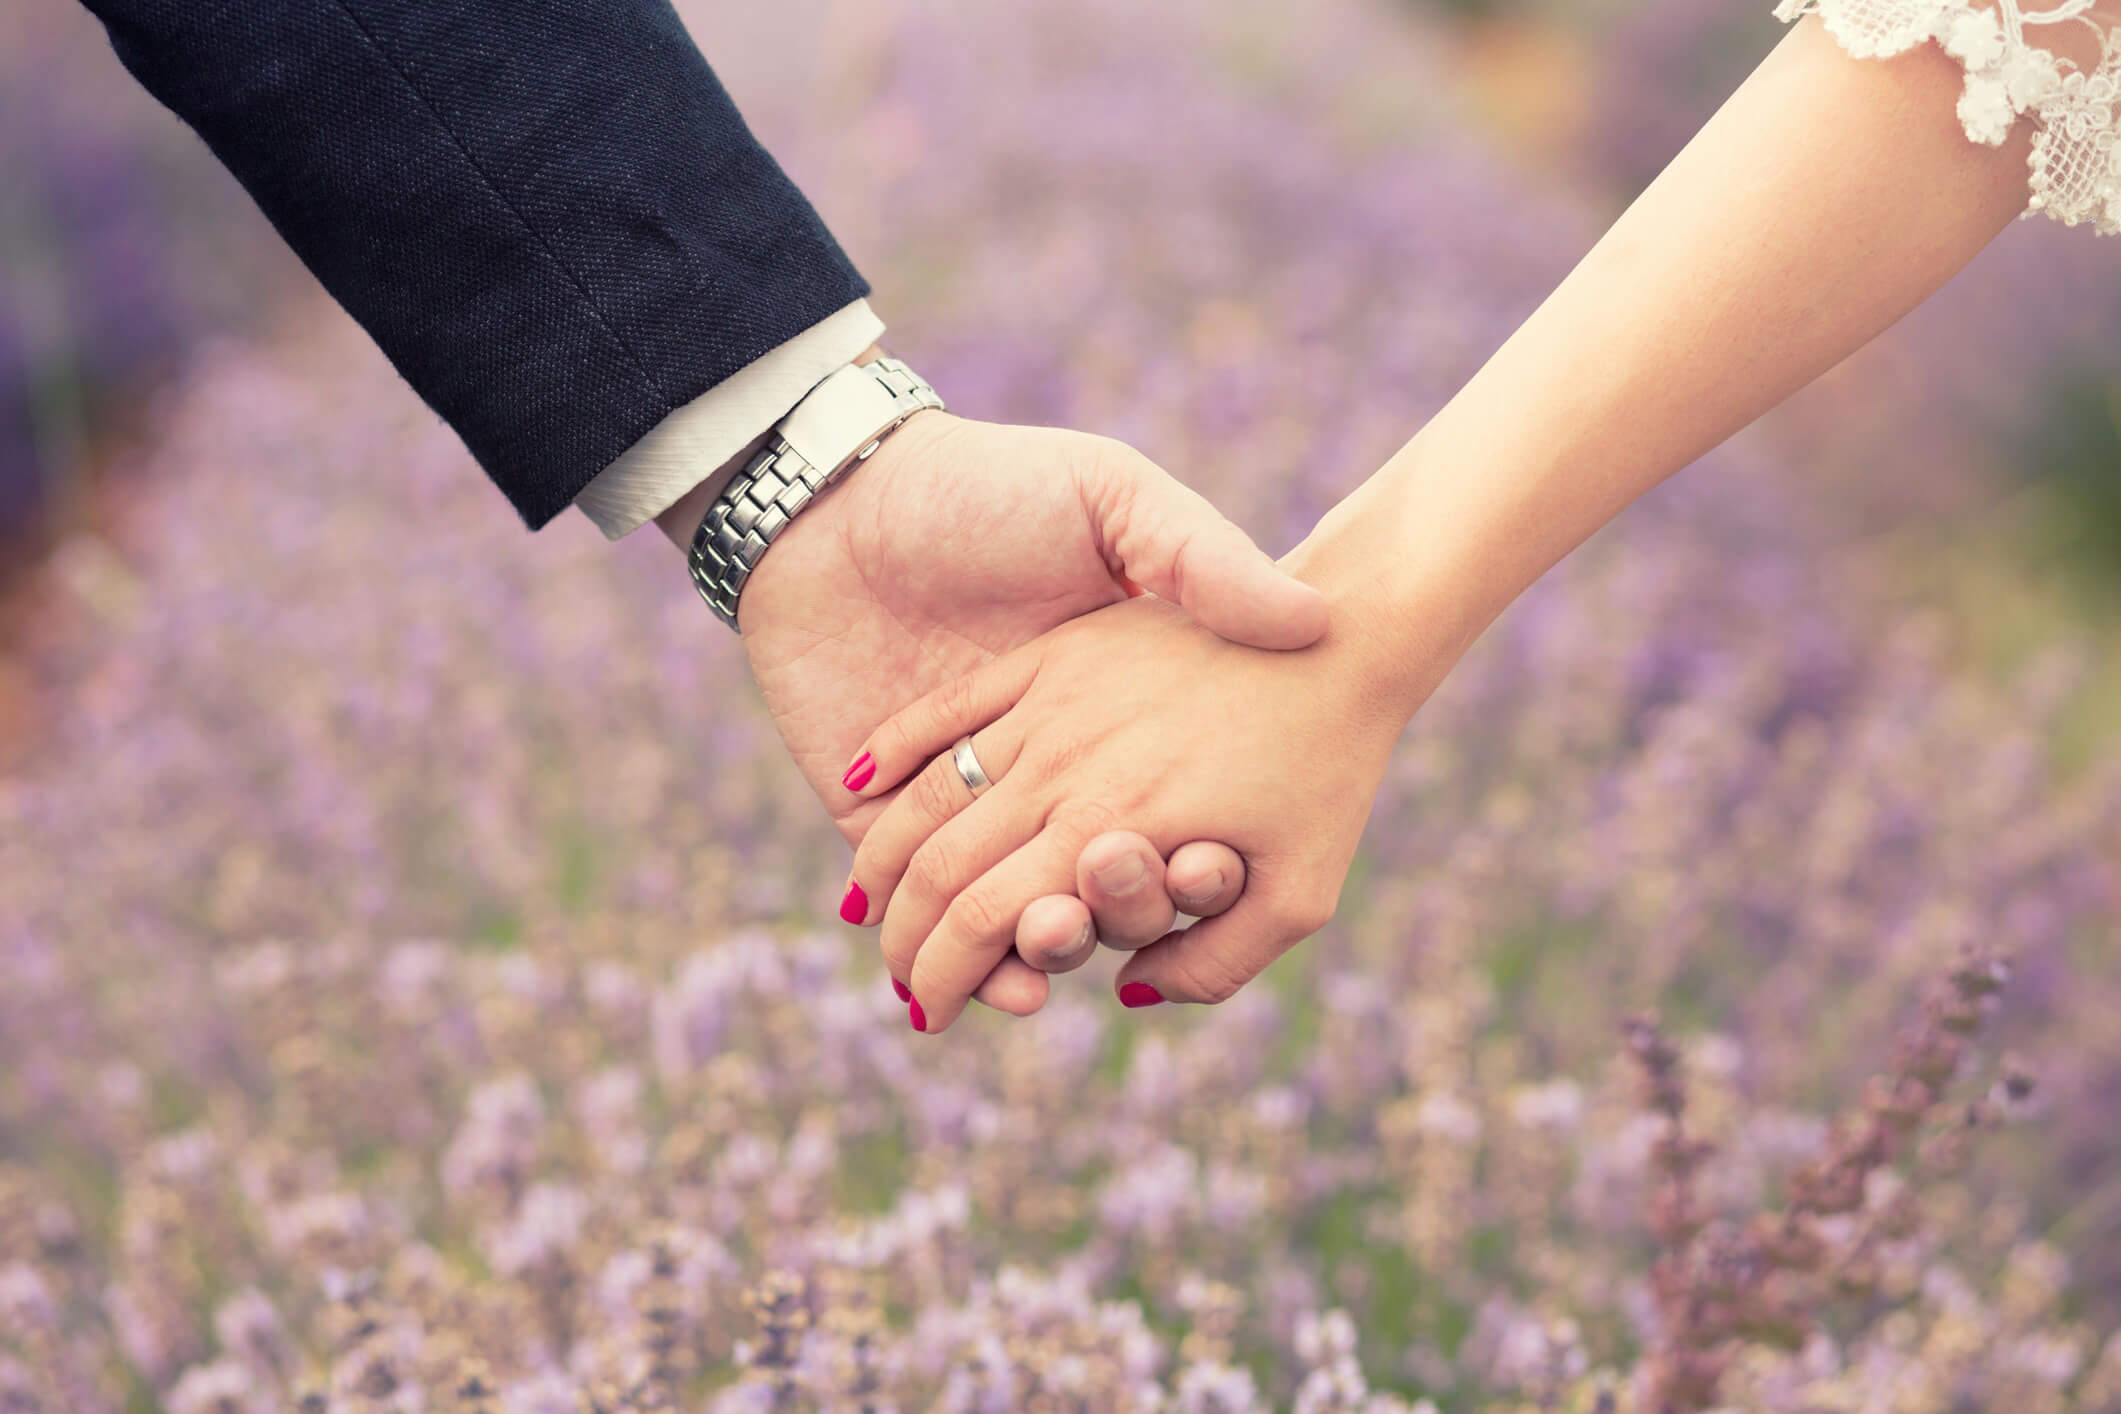 holding hands in front of lavender field